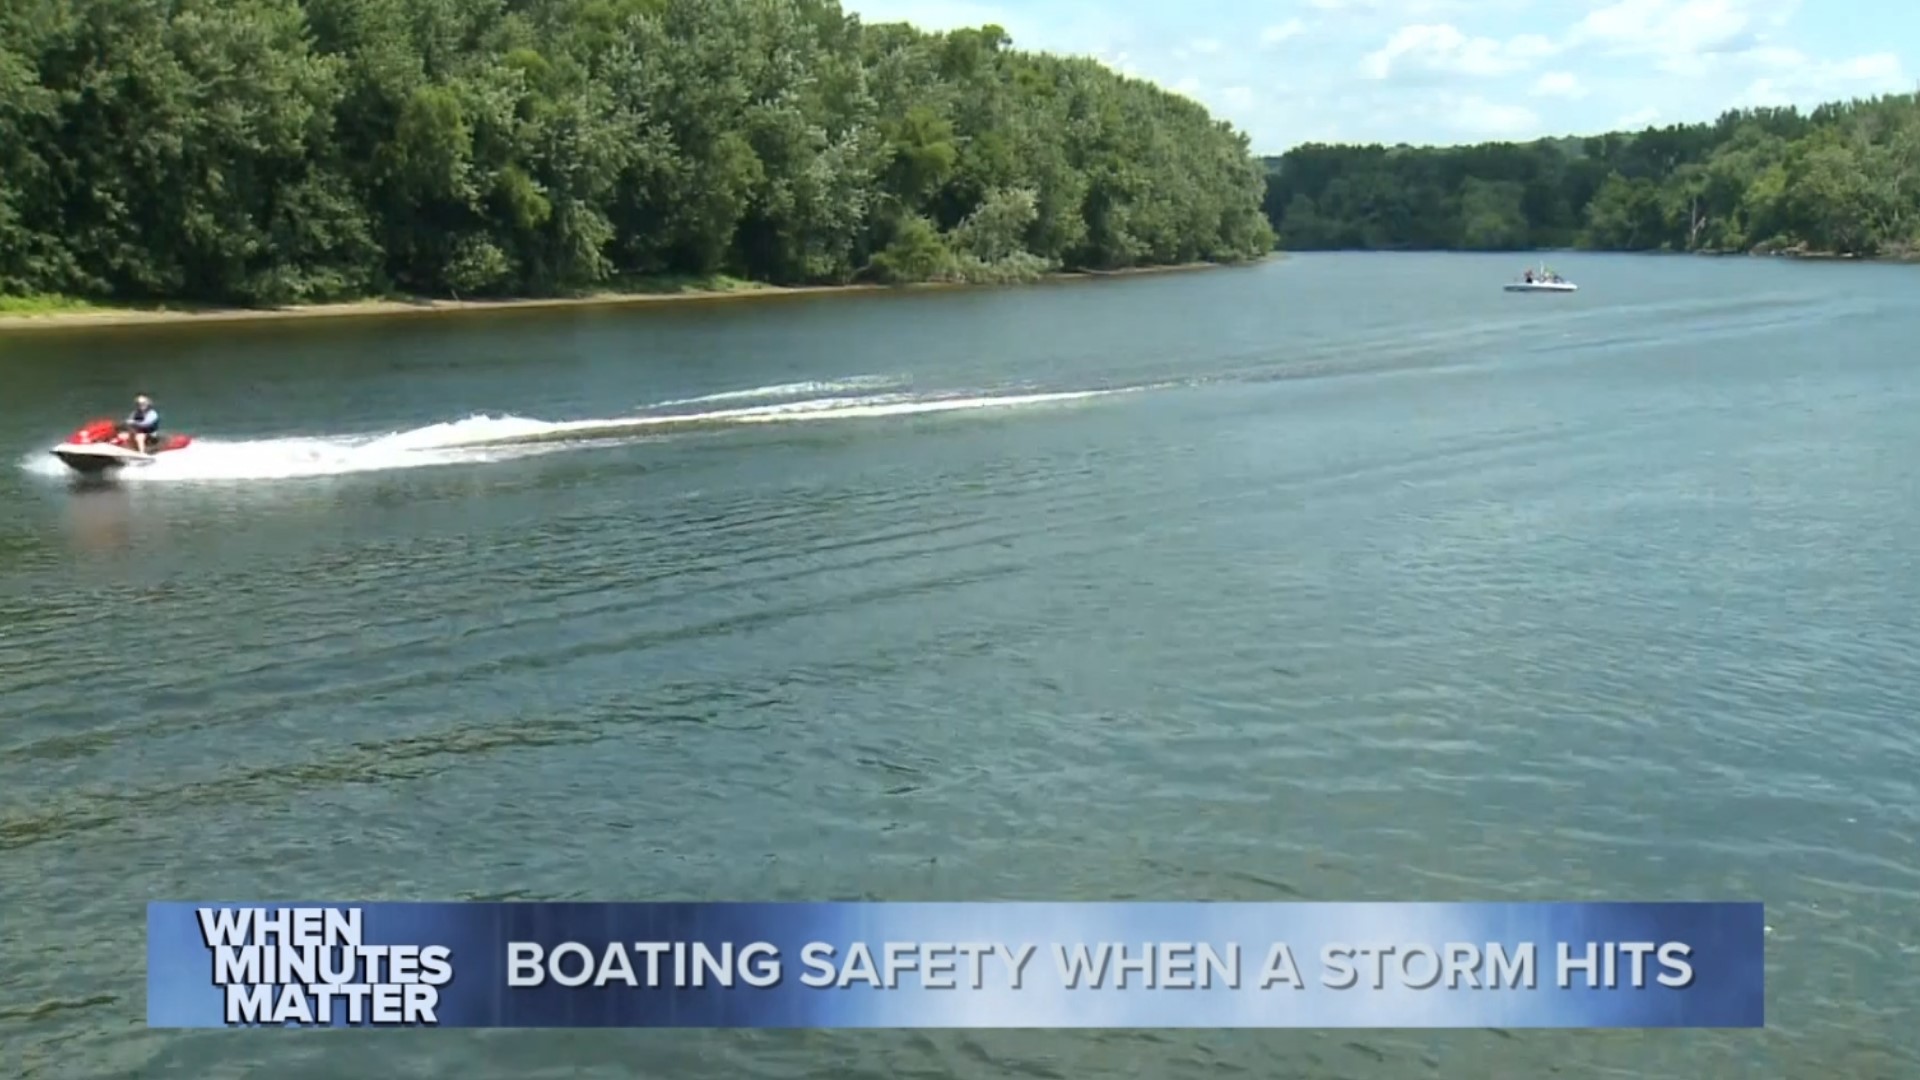 Safety is at the helm when it comes to boating in the summer. The Coast Guard requires boaters to have certain equipment on their vessels that could save lives.